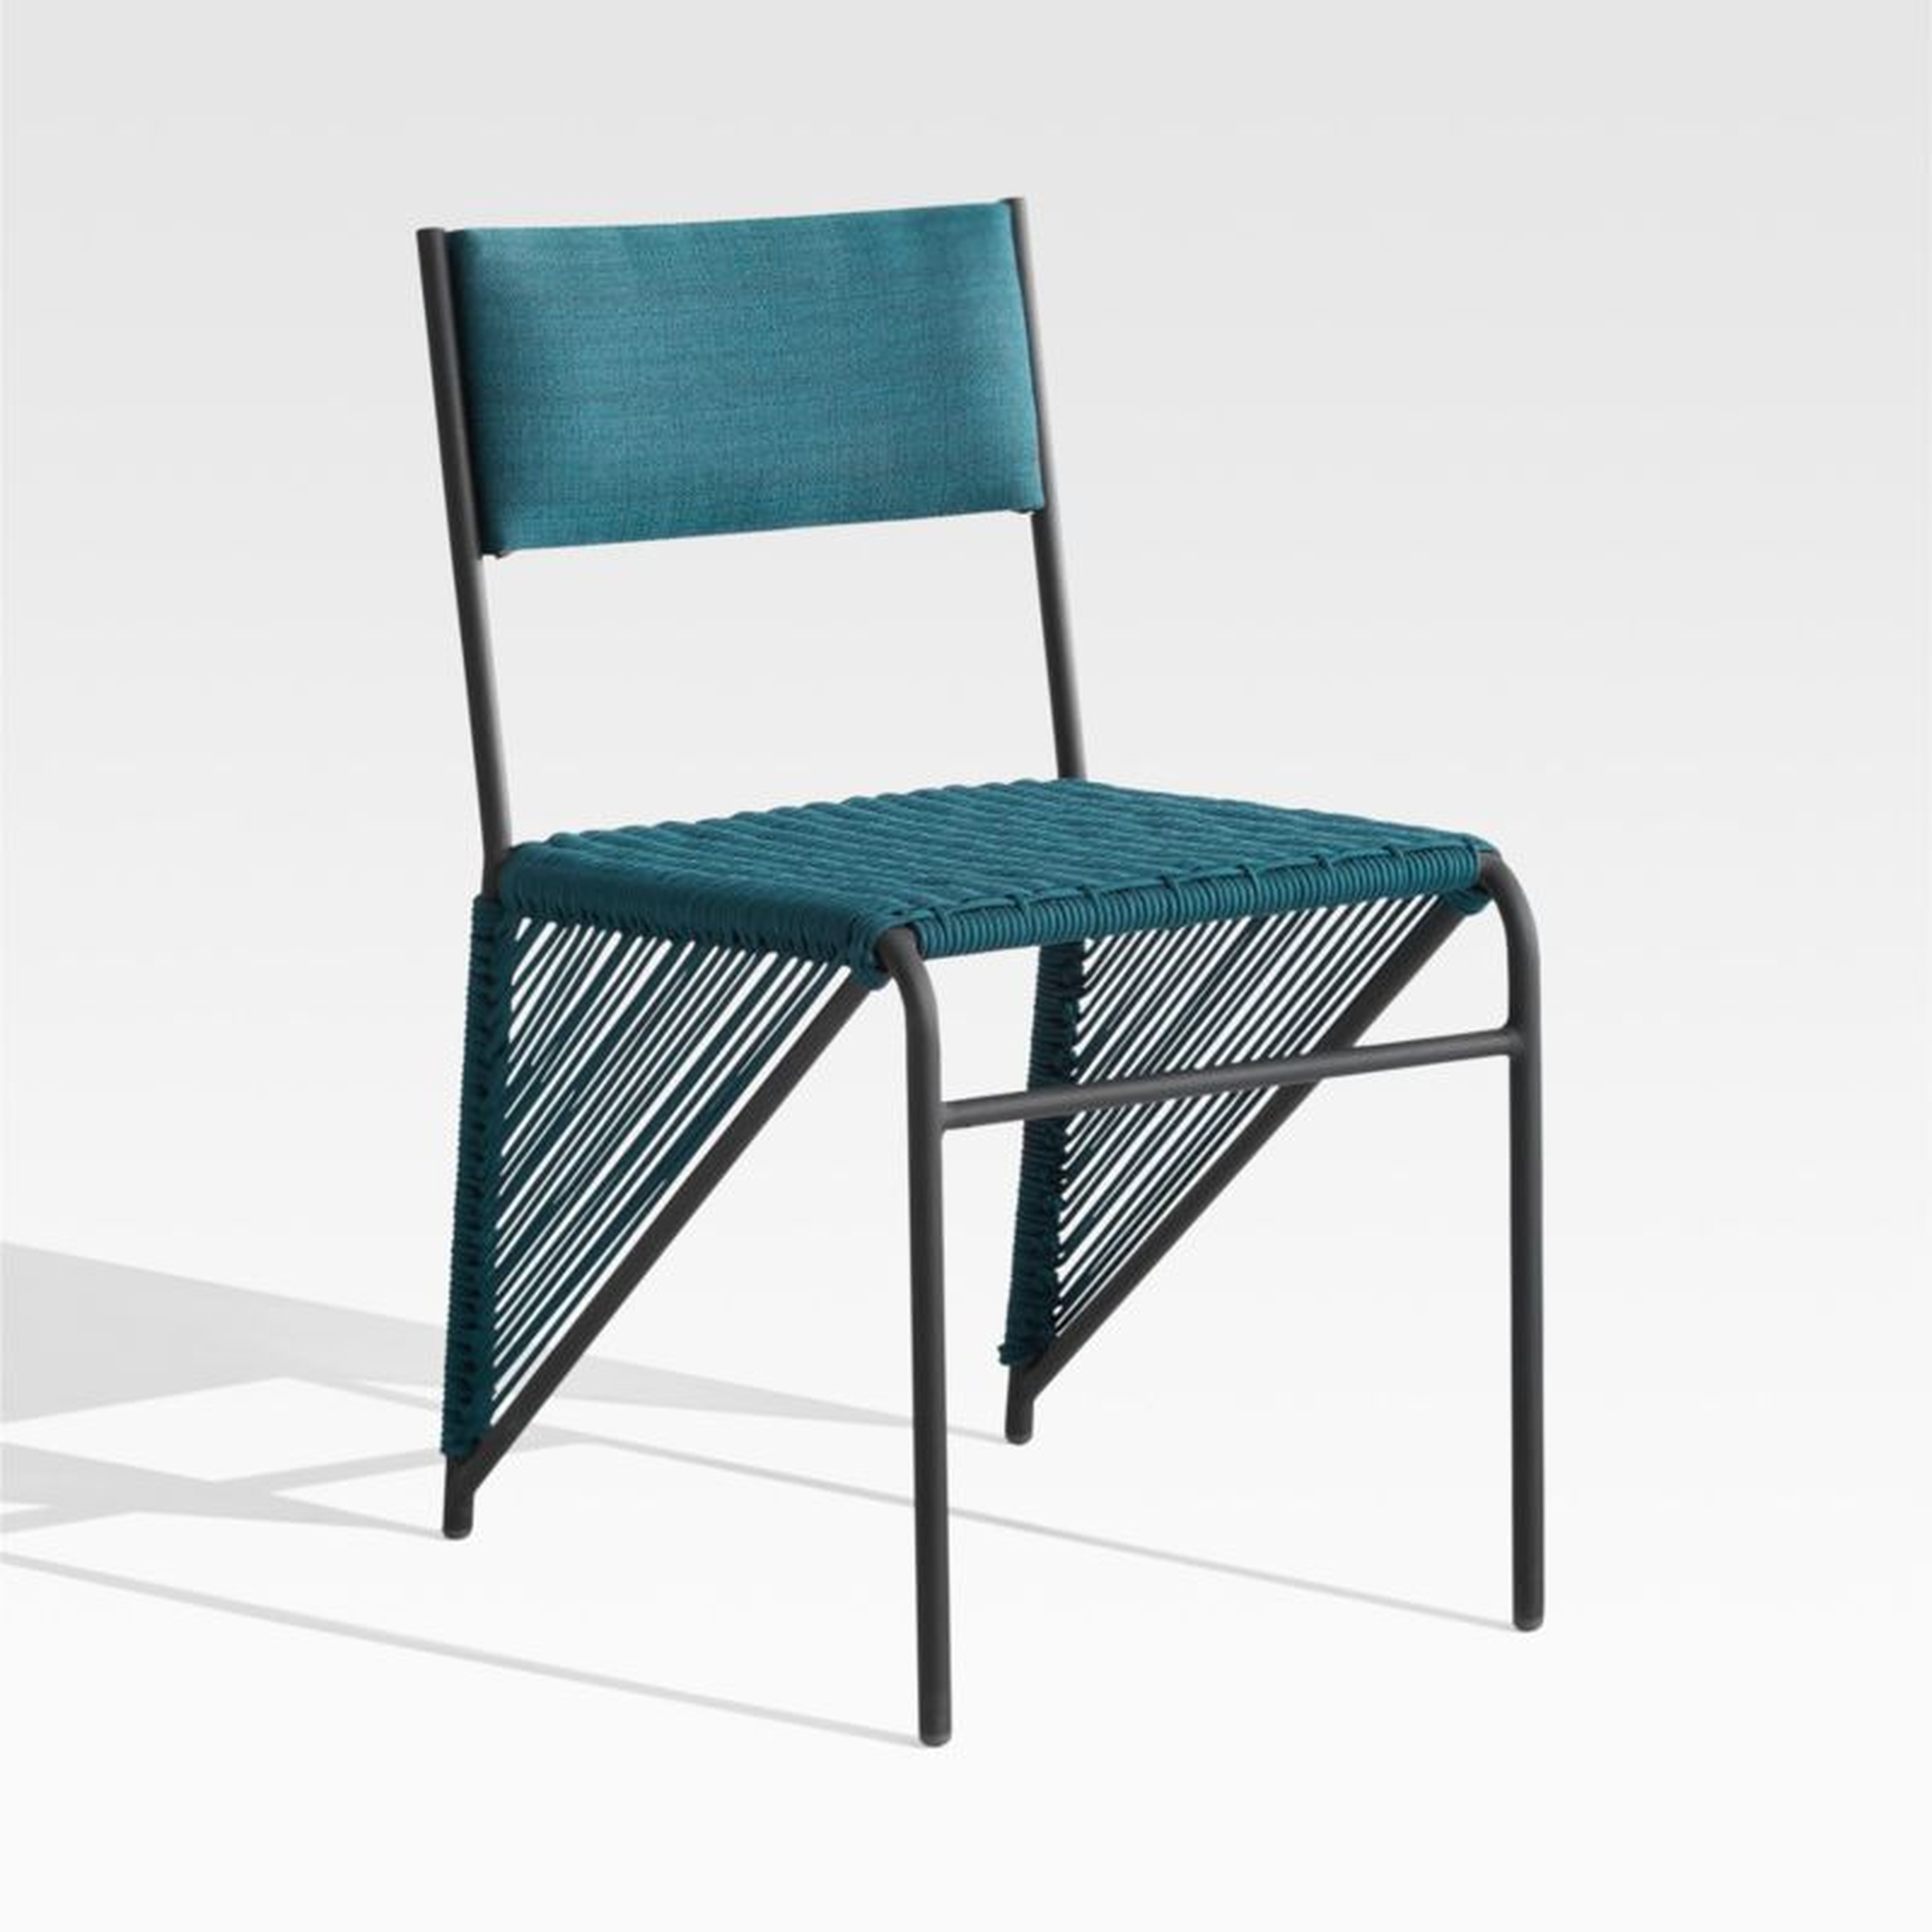 Dorado Teal Small Space Outdoor Dining Chair - Crate and Barrel